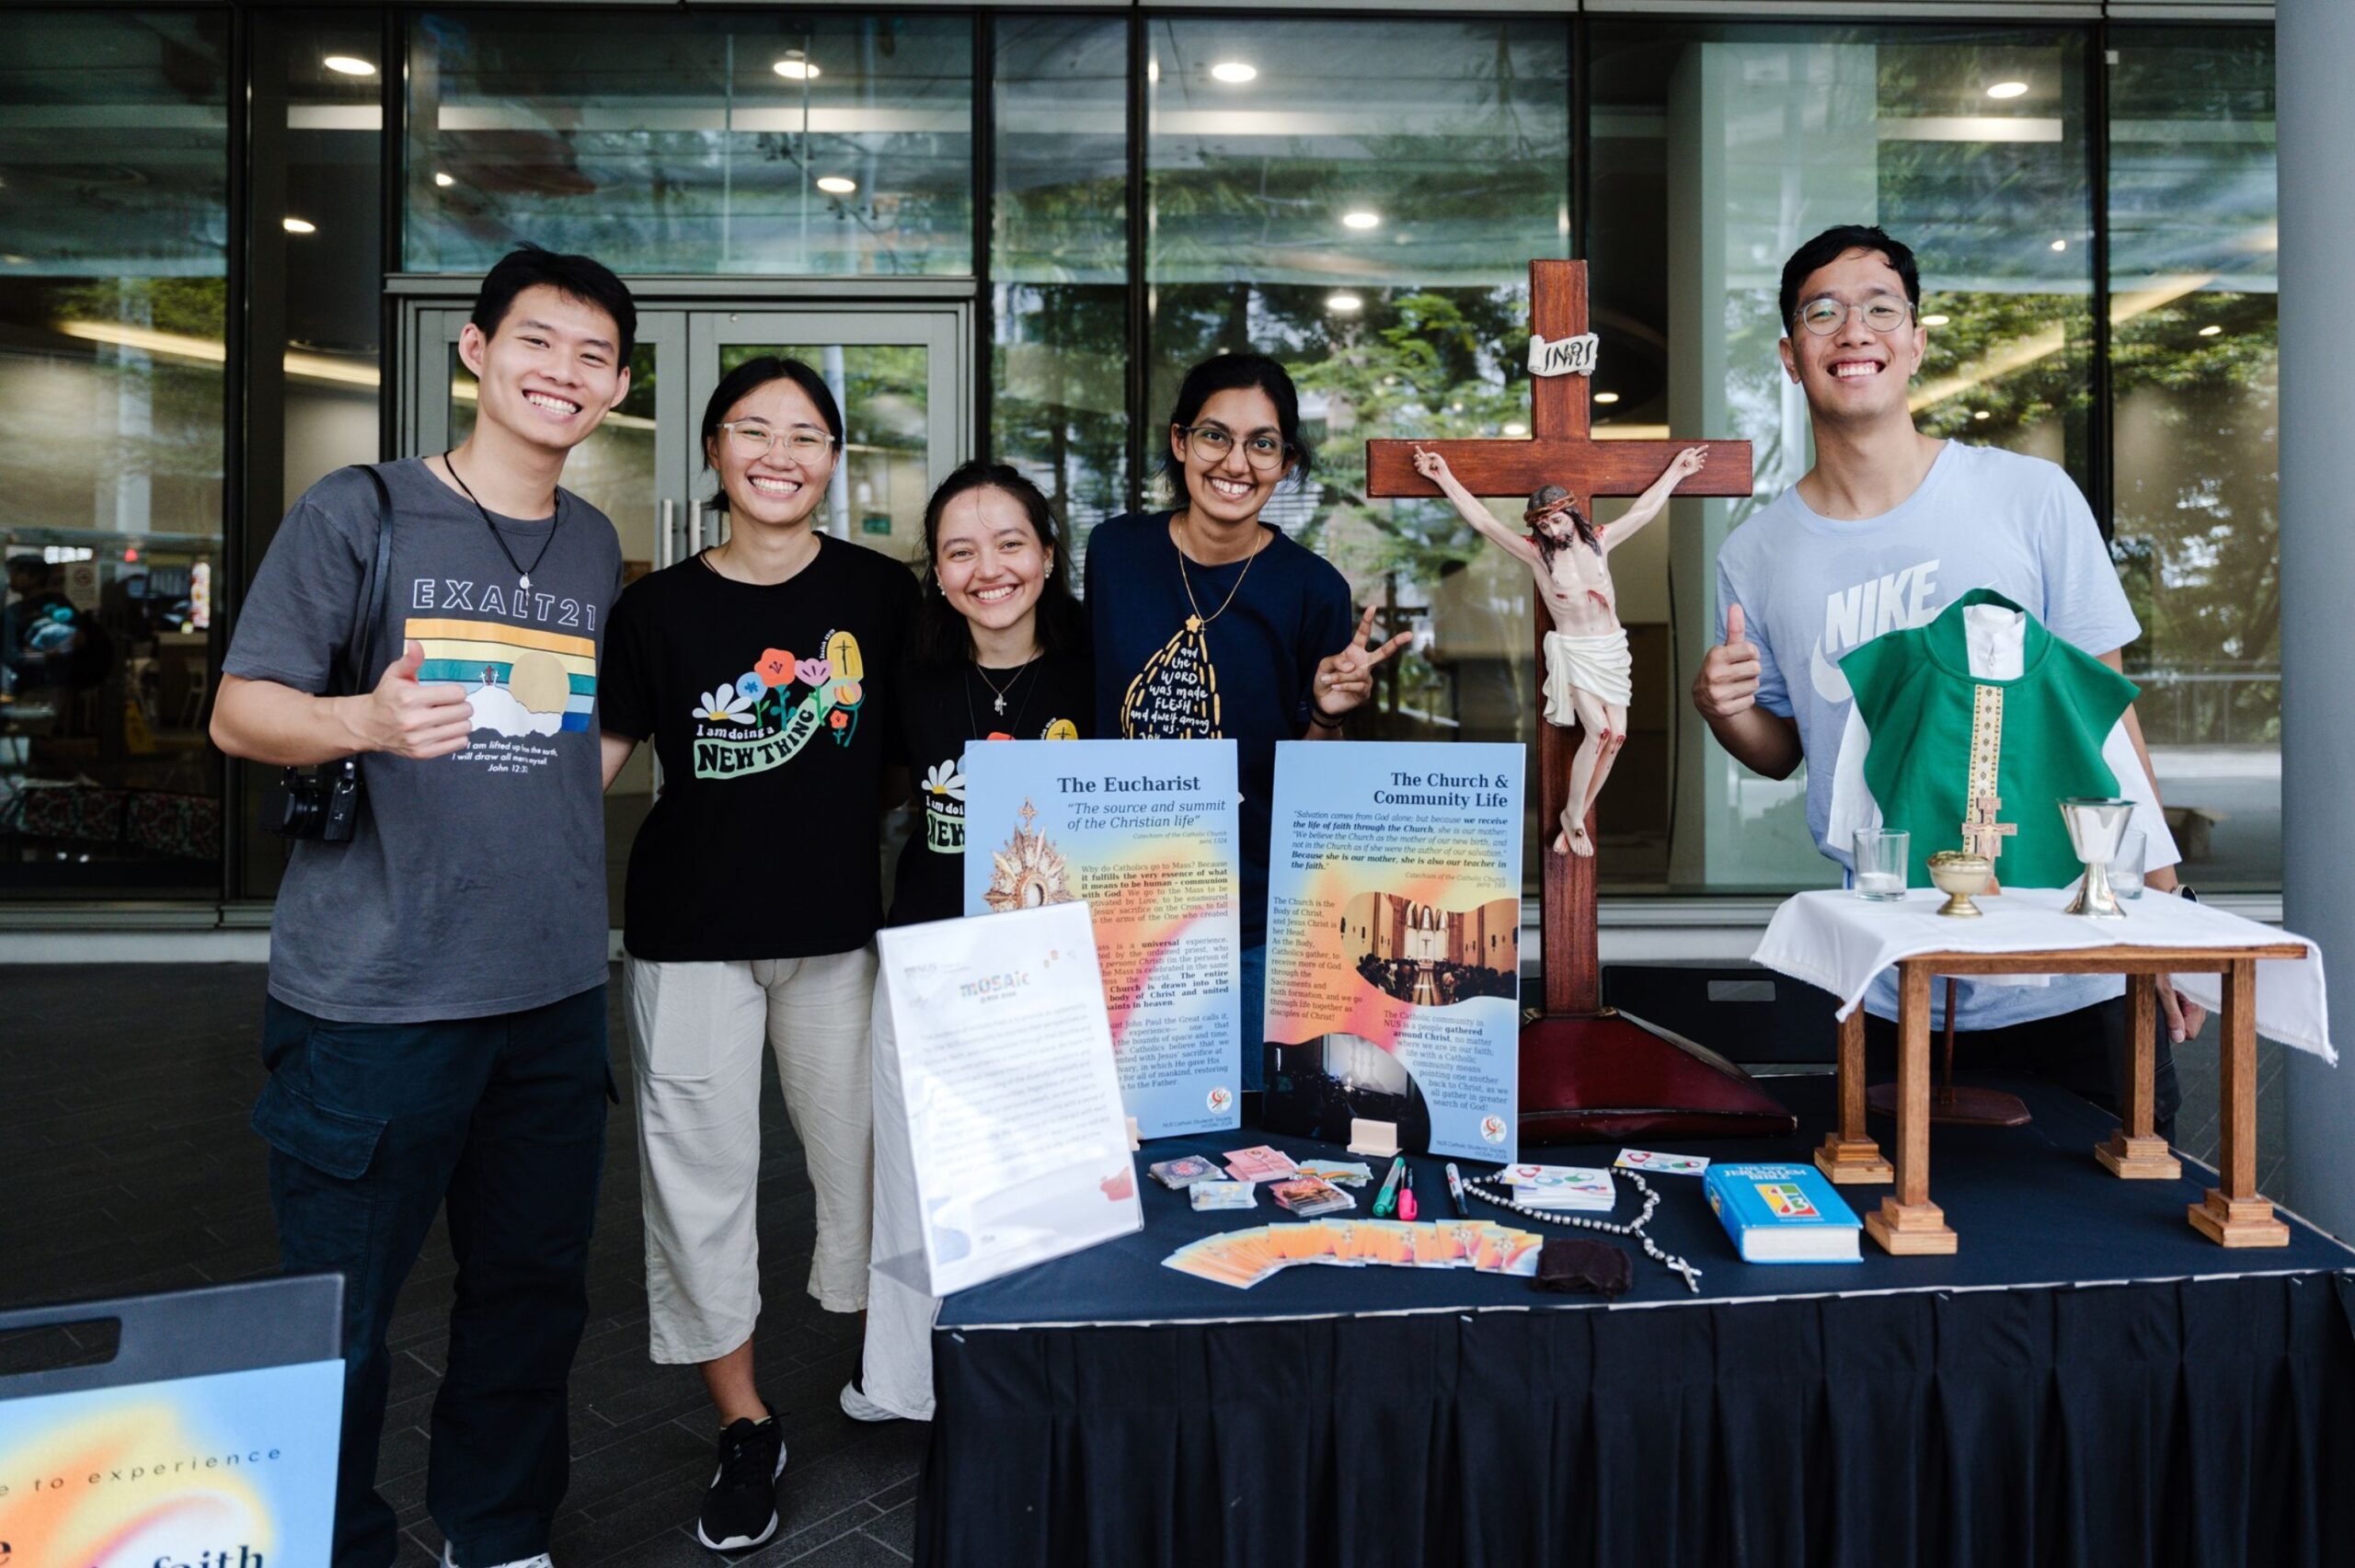 Faith-based student groups such as NUS Catholic Students' Society were present to raise awareness about their faith.